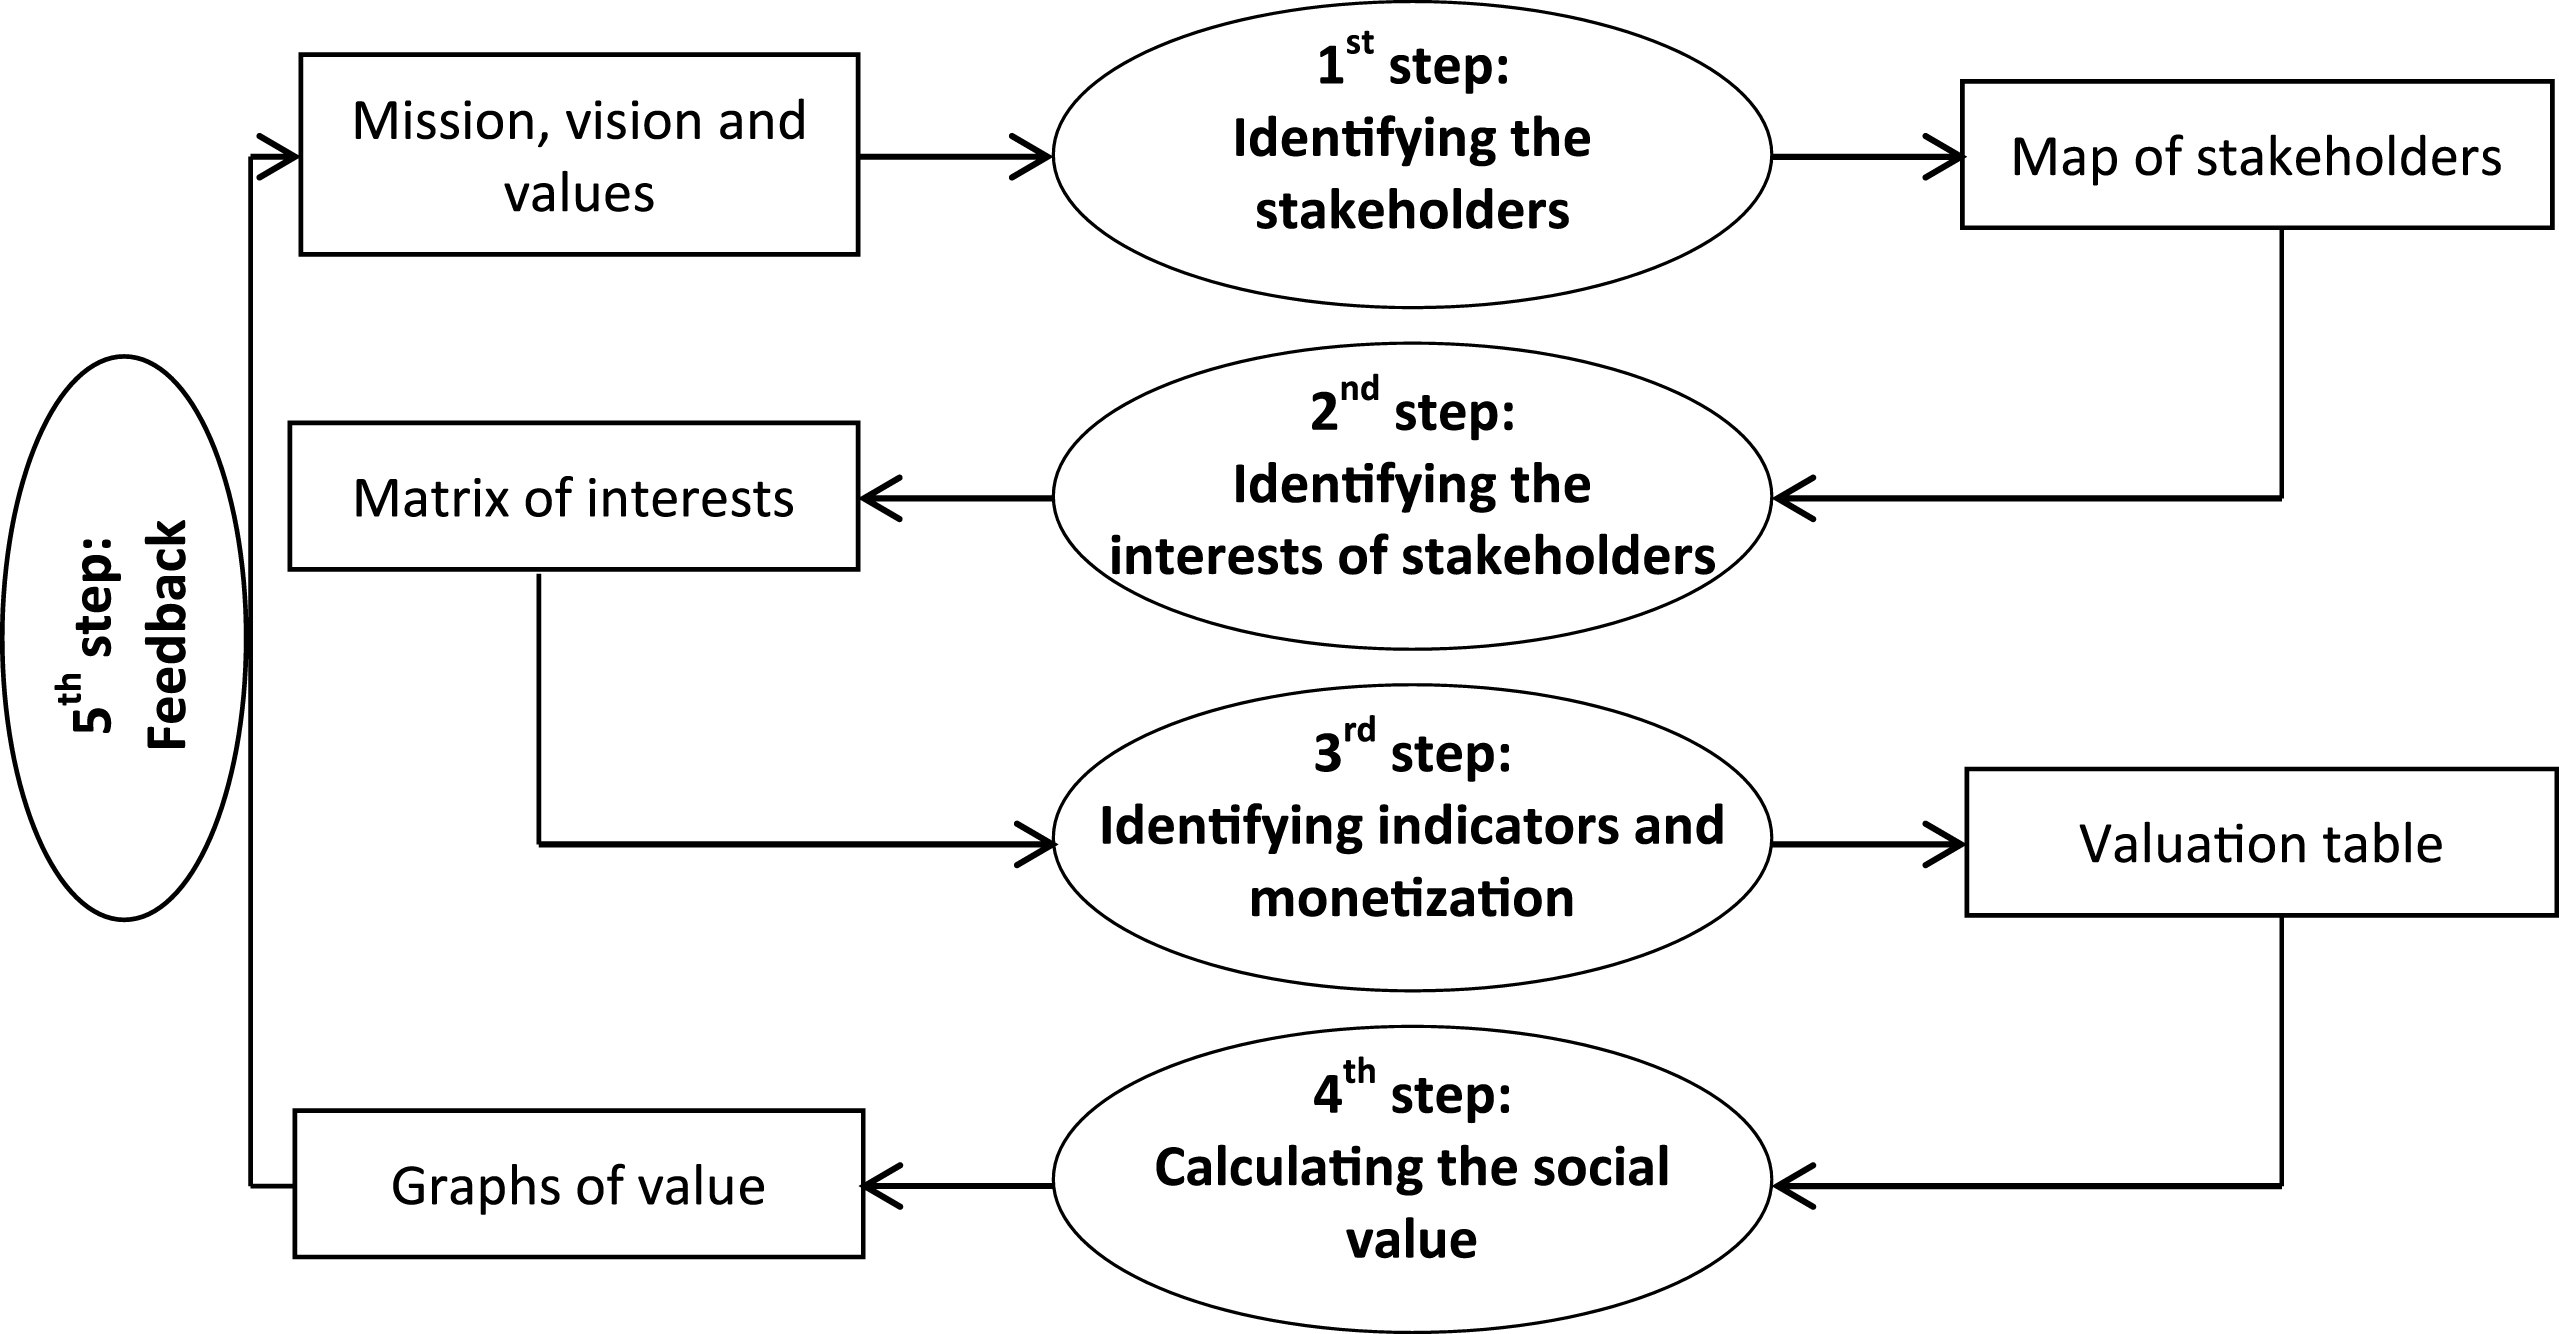 Steps in the model to calculate social value. Source: Own elaboration based on [74].